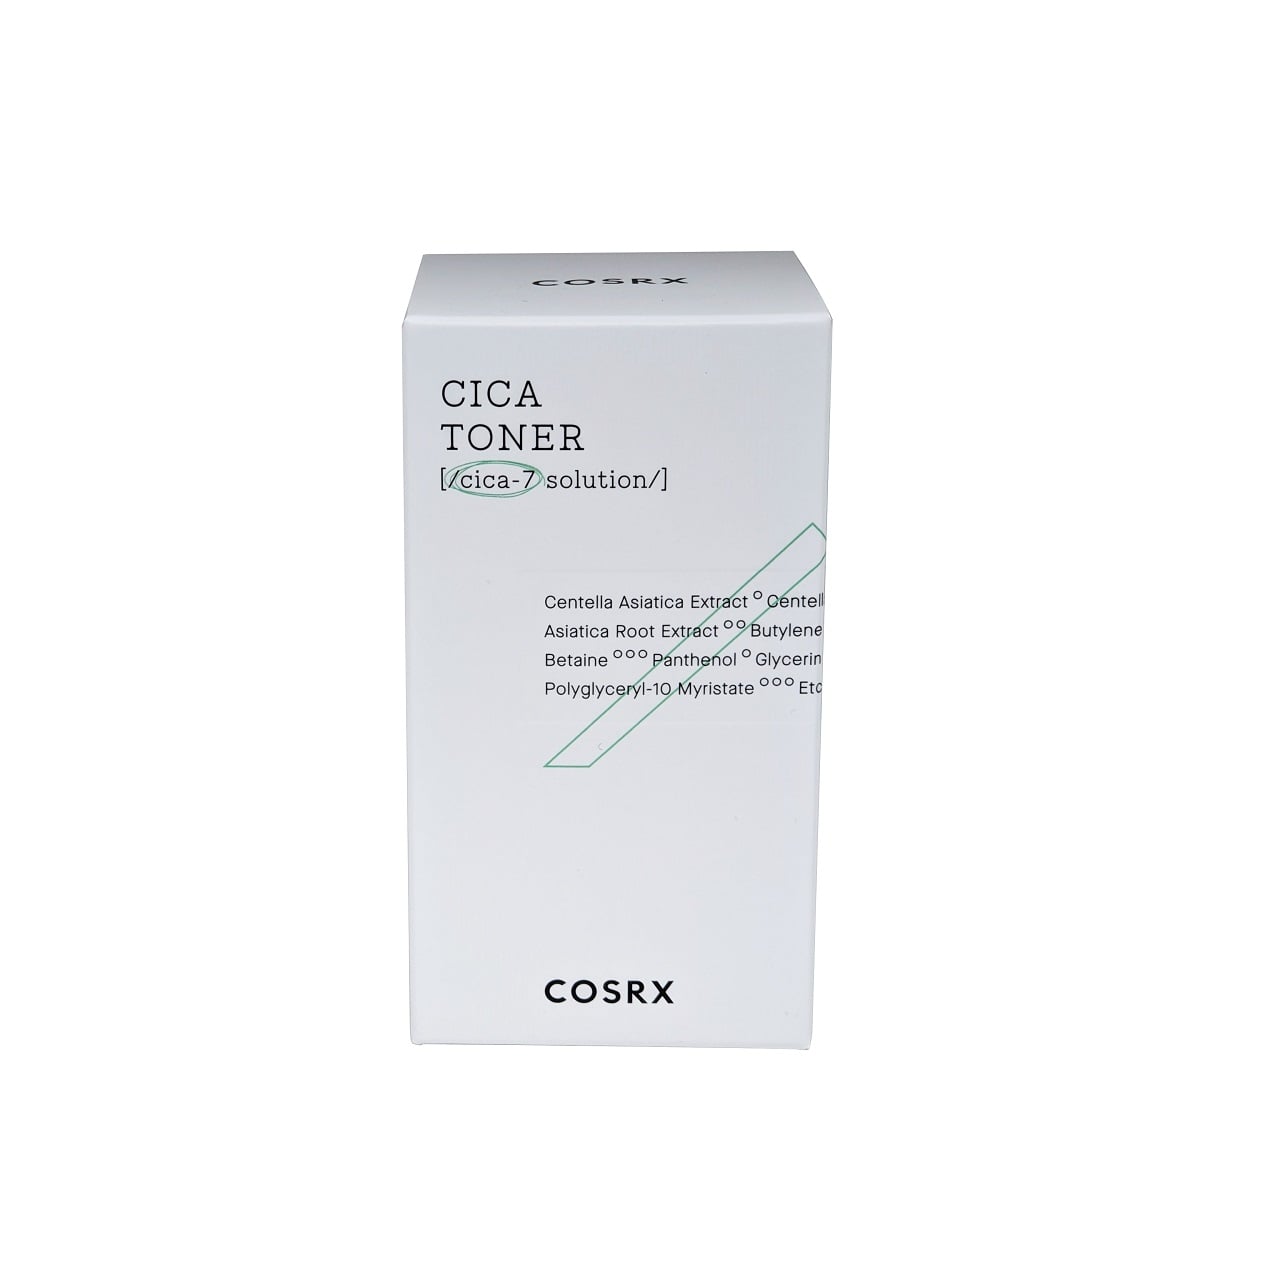 Product label for COSRX Pure Fit Cica Toner